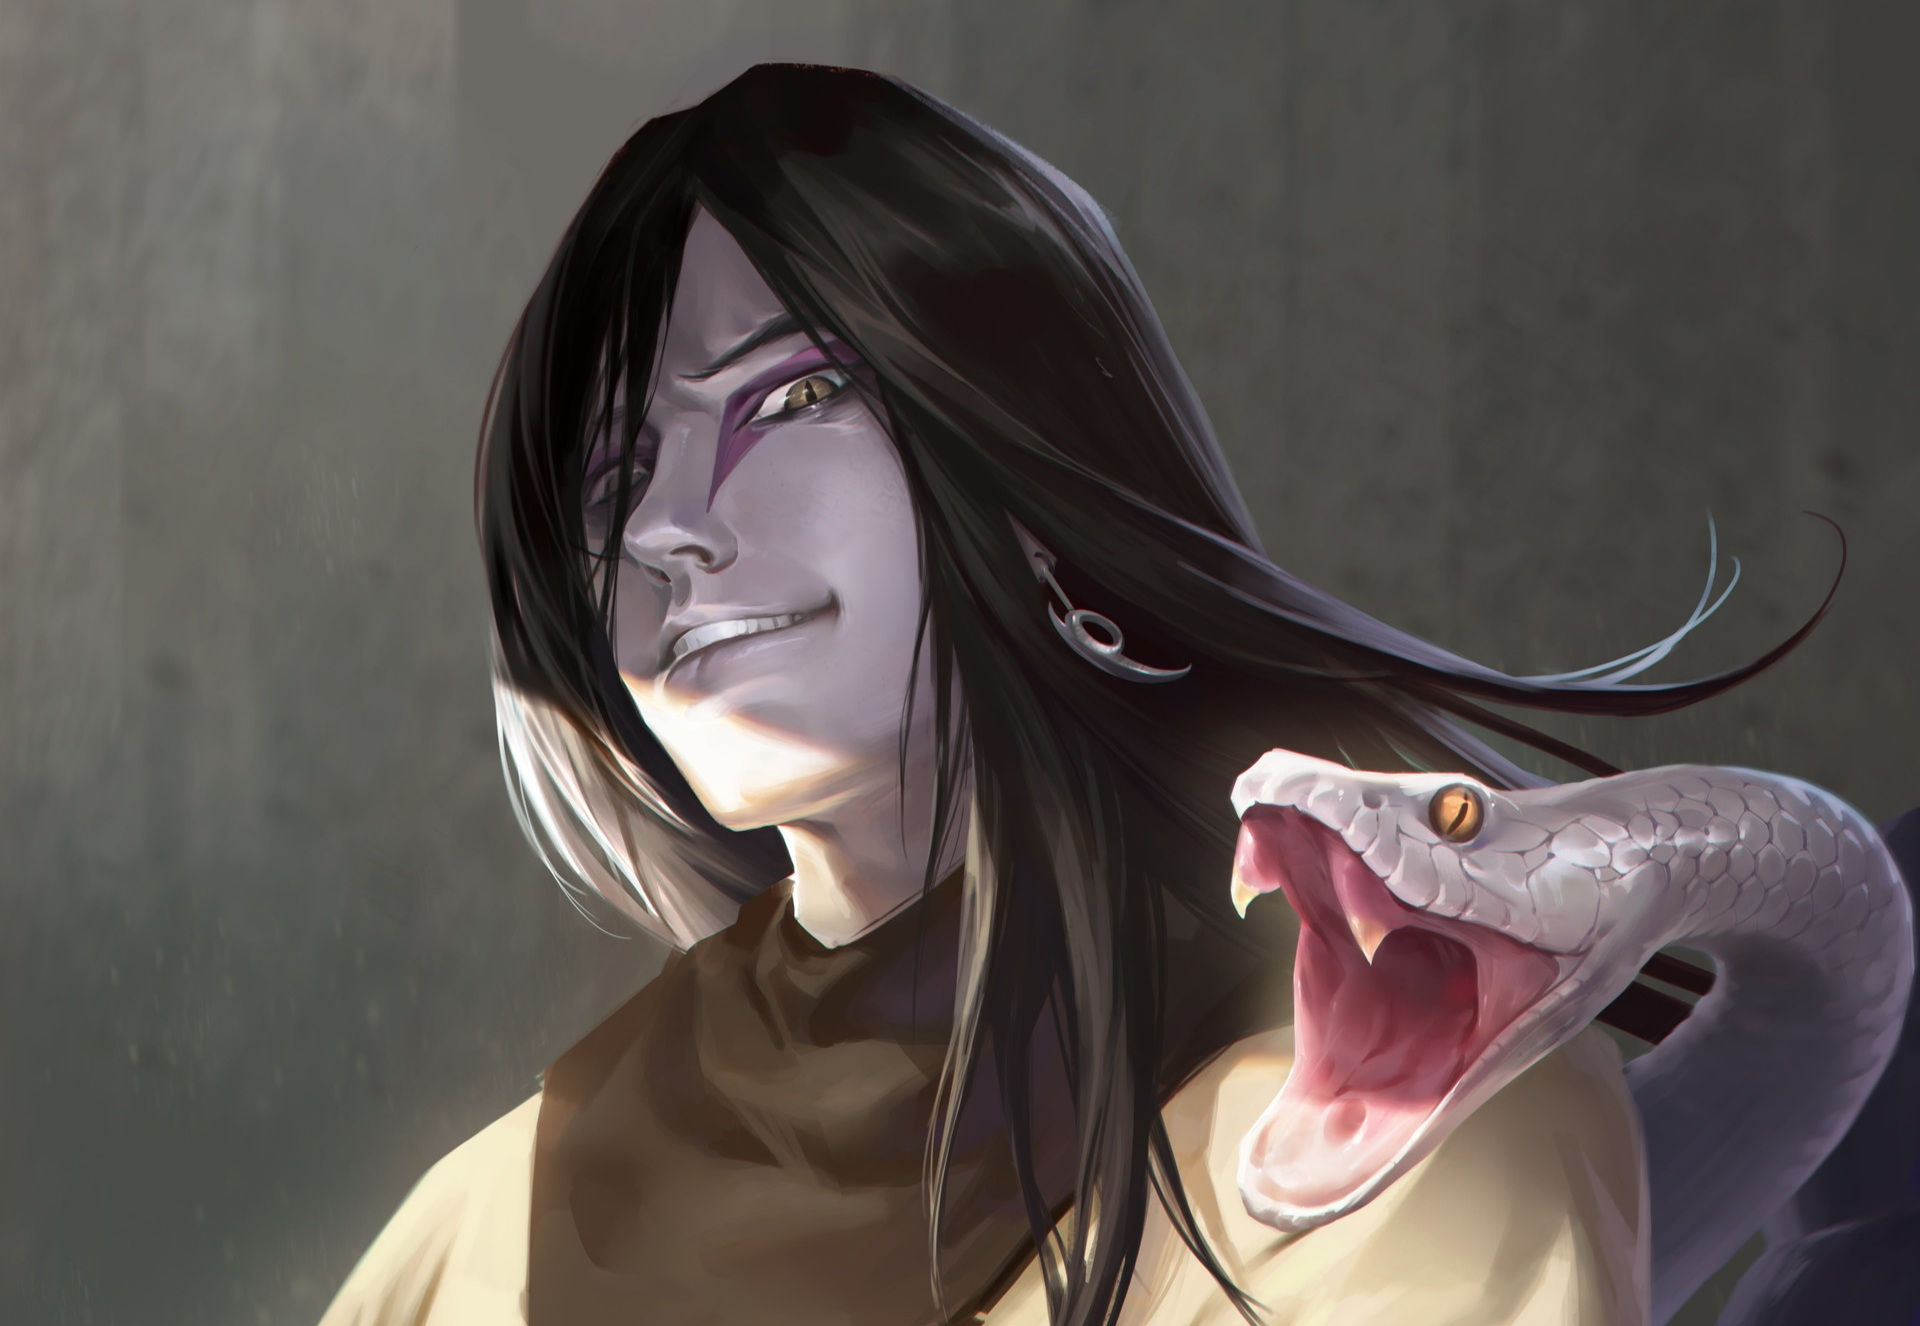 1920x1326 50+ Orochimaru (Naruto) HD Wallpapers and Backgrounds